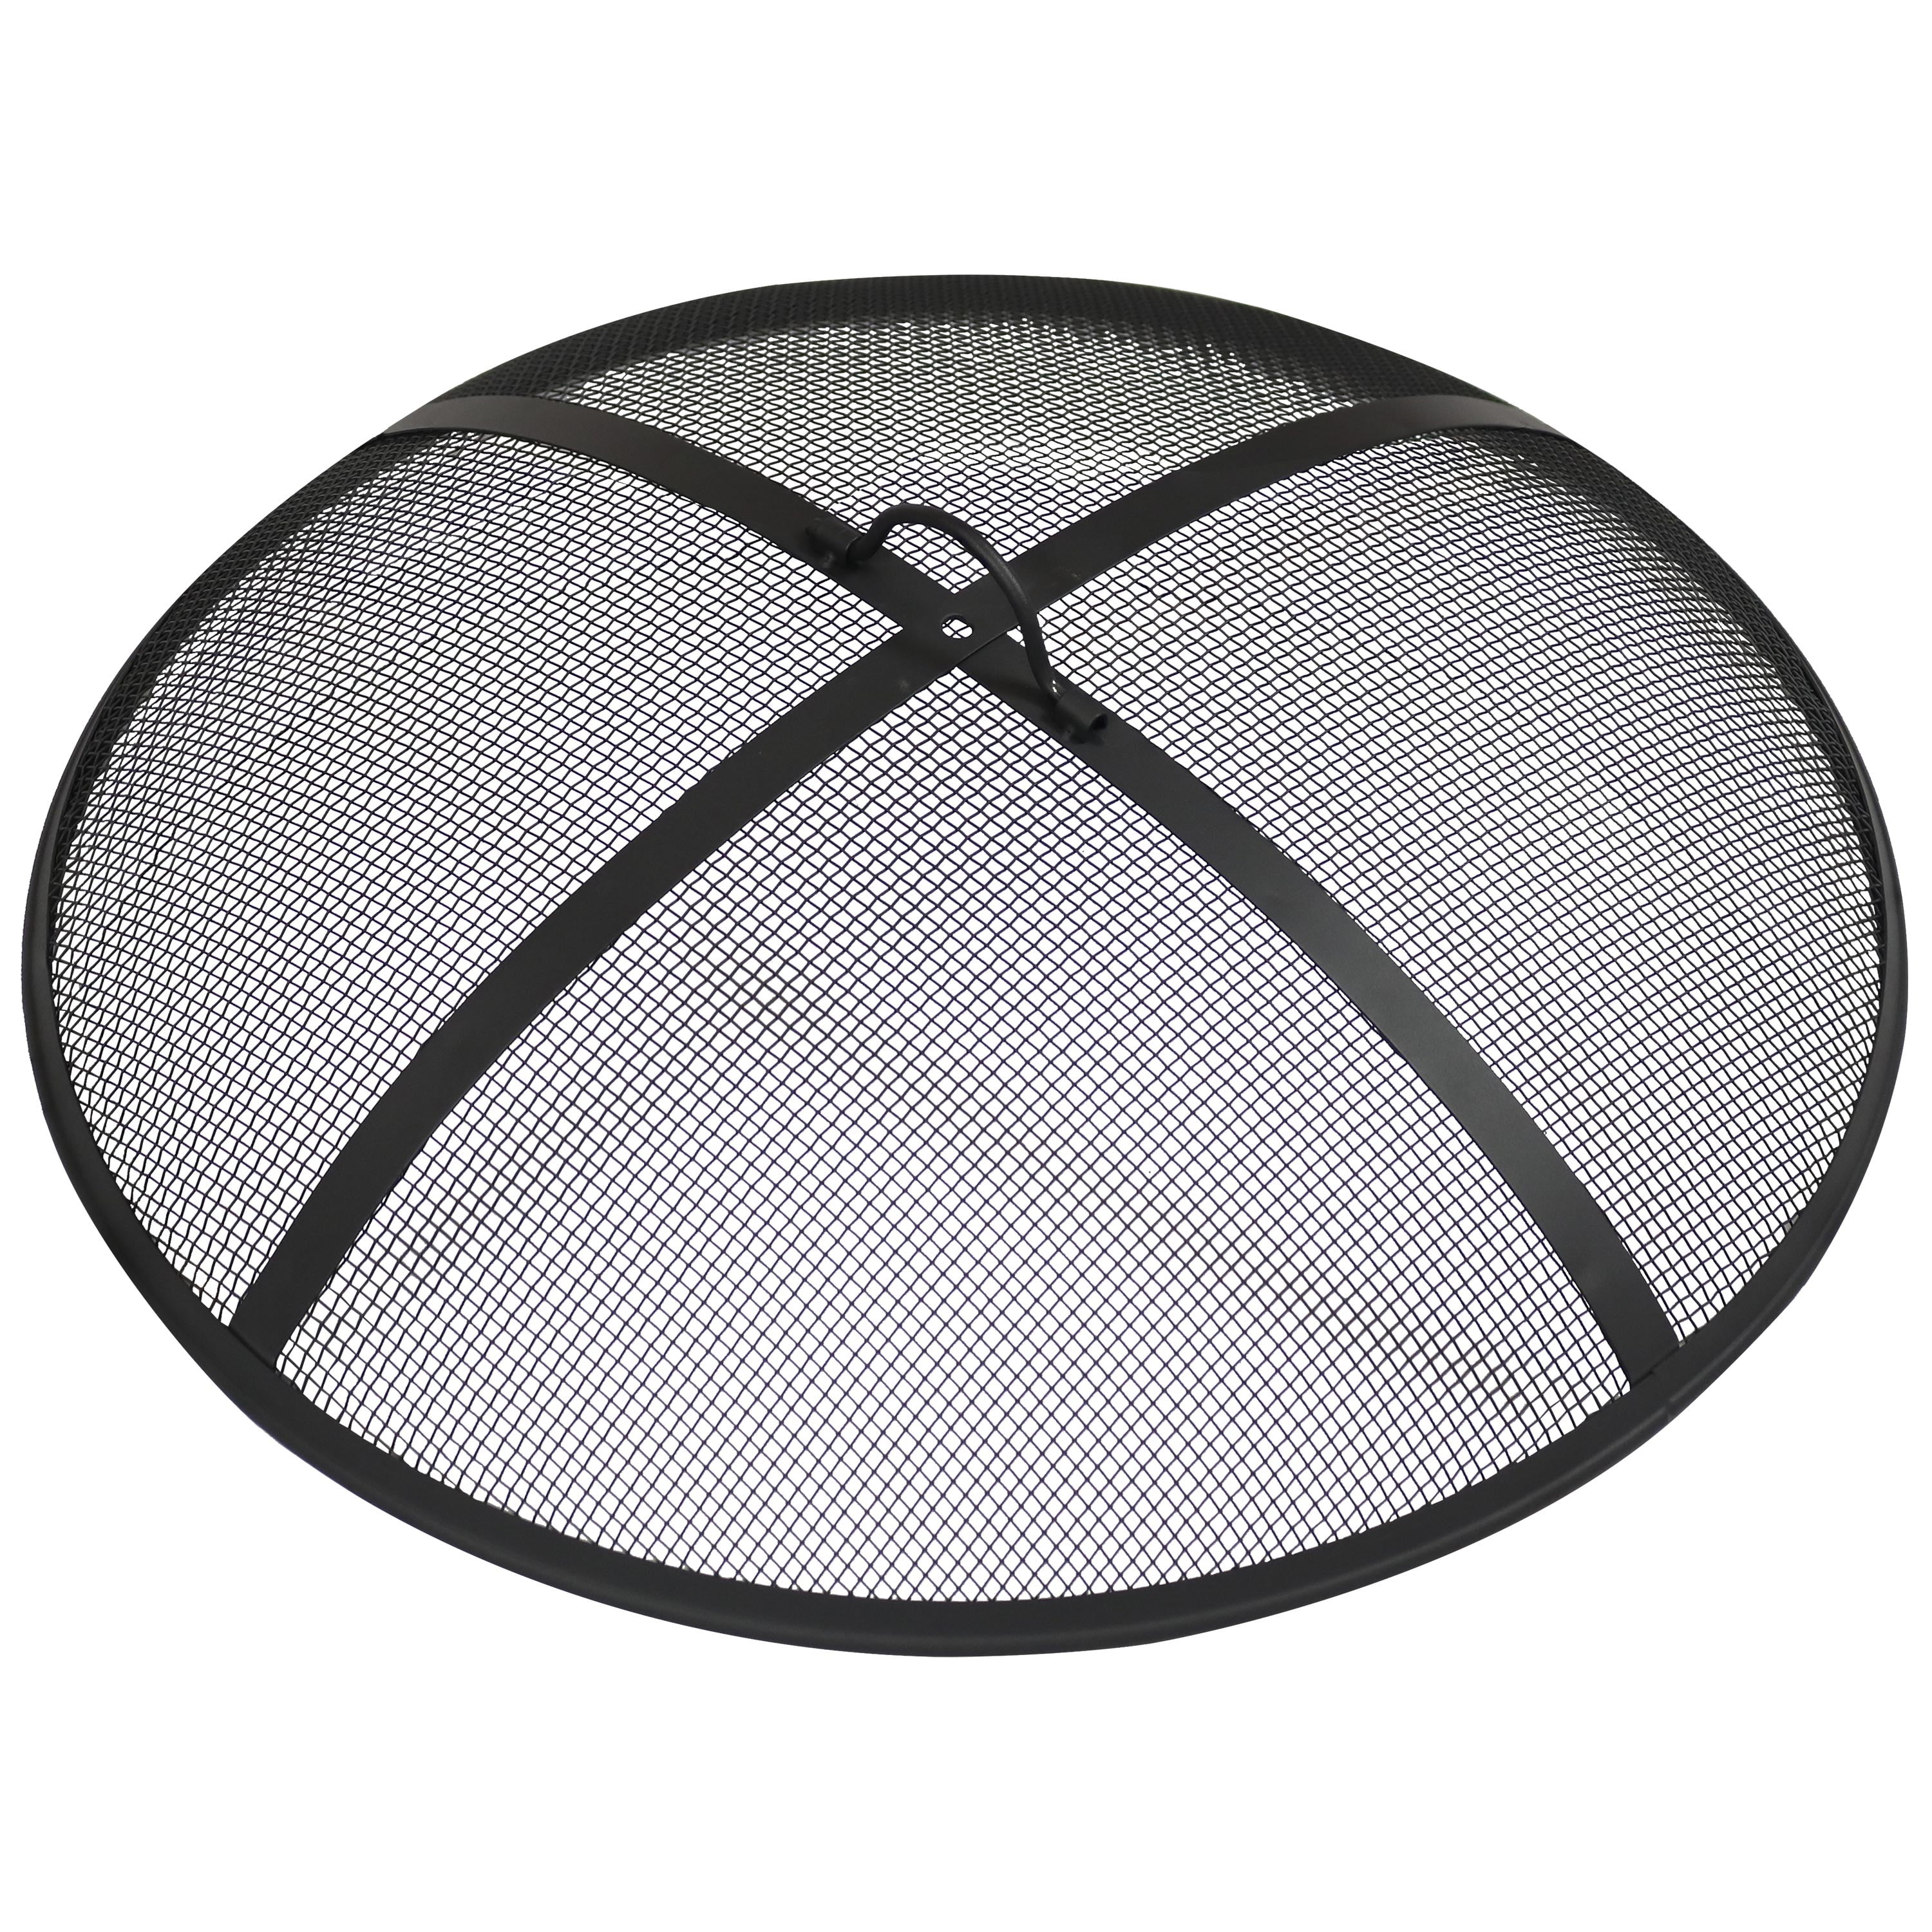 Sunnydaze Outdoor Fire Pit Spark Screen Guard Accessory - Round Fire Pit  Screen Cover - Heavy-Duty Steel Backyard Fire Pit Mesh Screen with Handle -  